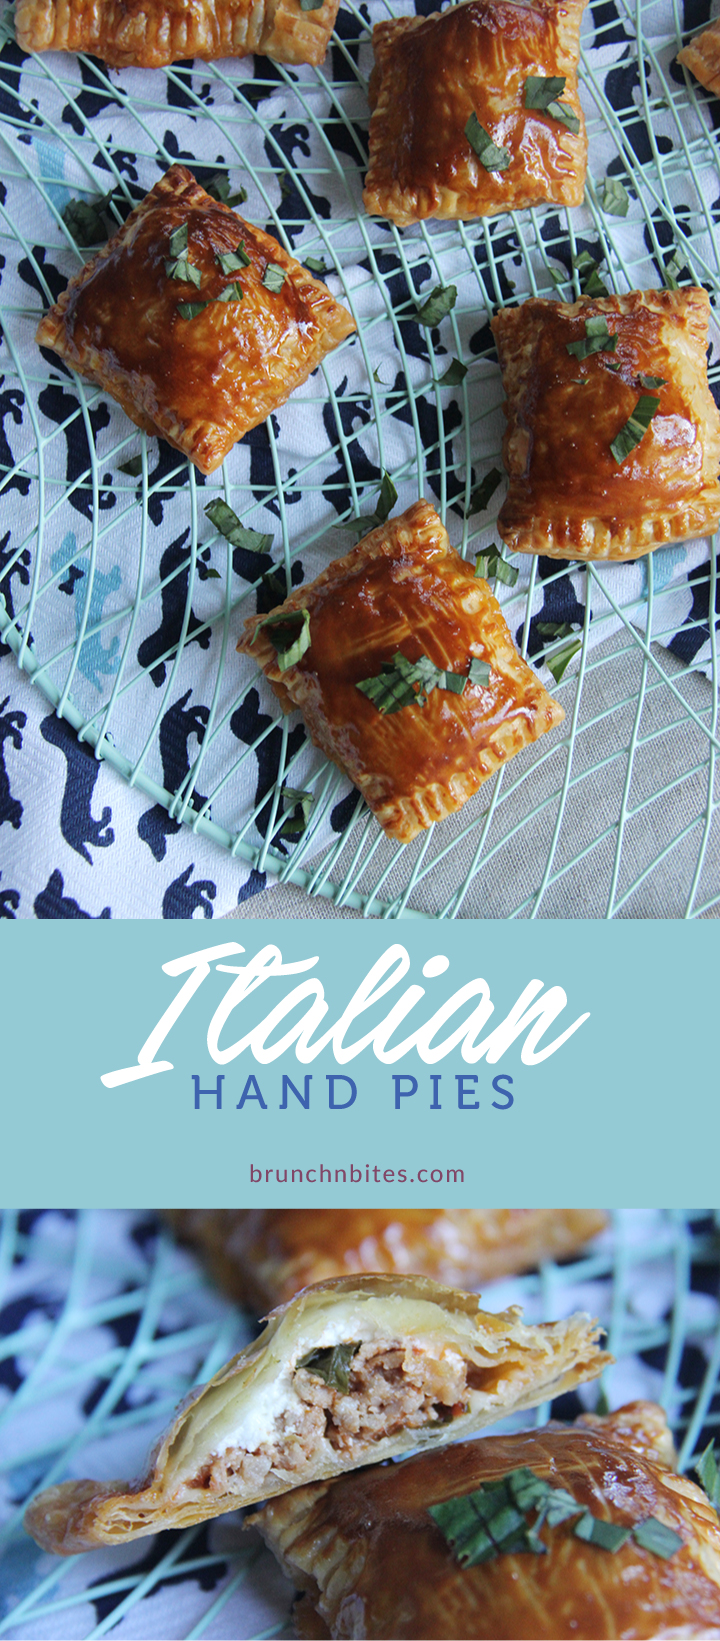 Italian hand pies. Scrumptious sausage filling. Completely irresistible. Totally addictive. These dainty hand pies are full of flavor and gooey cheese and one of the most delightful pies you can make any time.